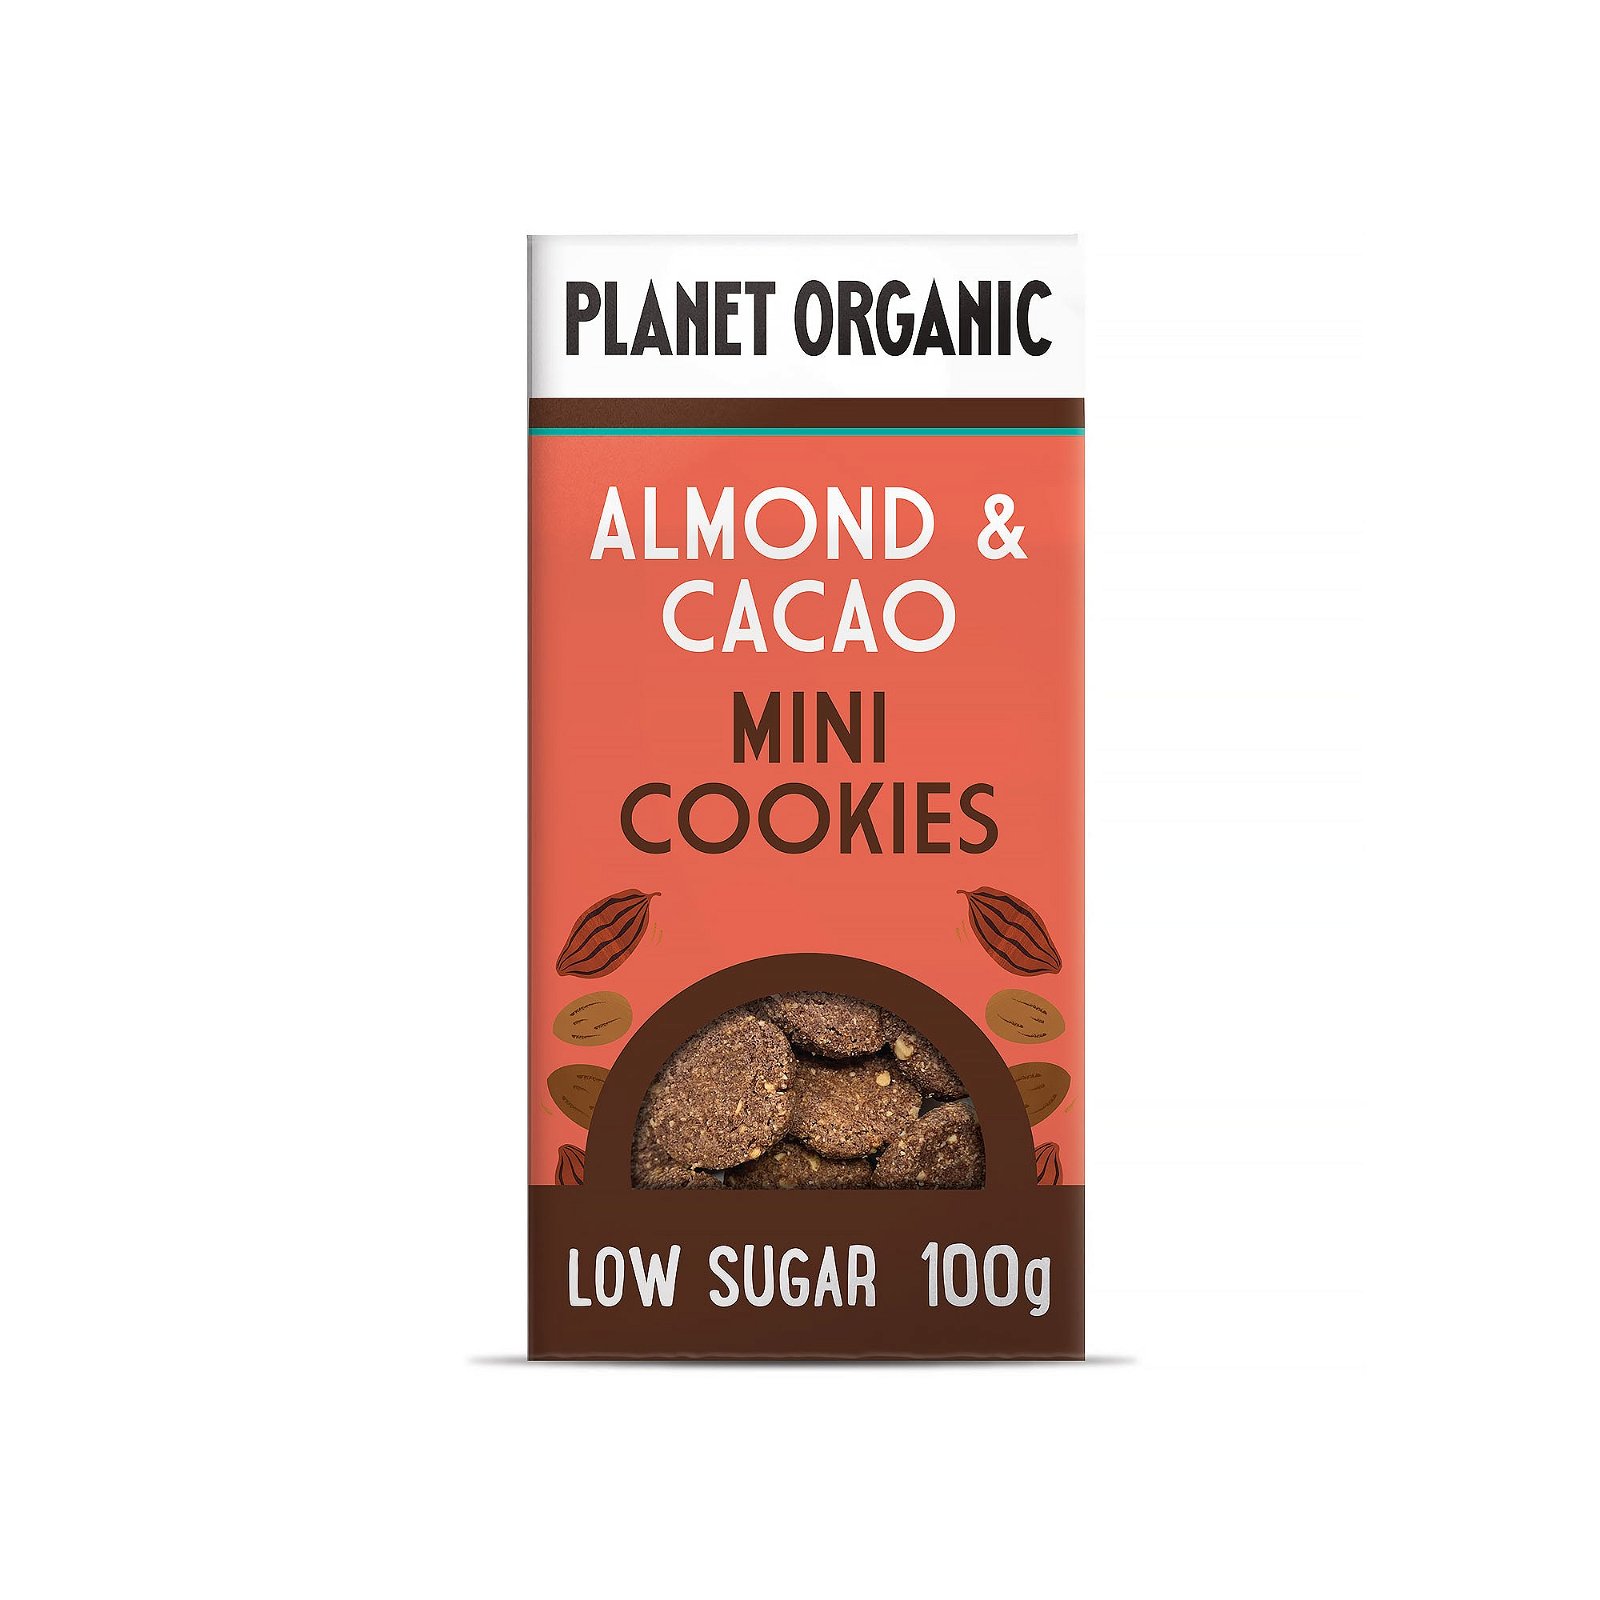 20% off selected Planet Organic